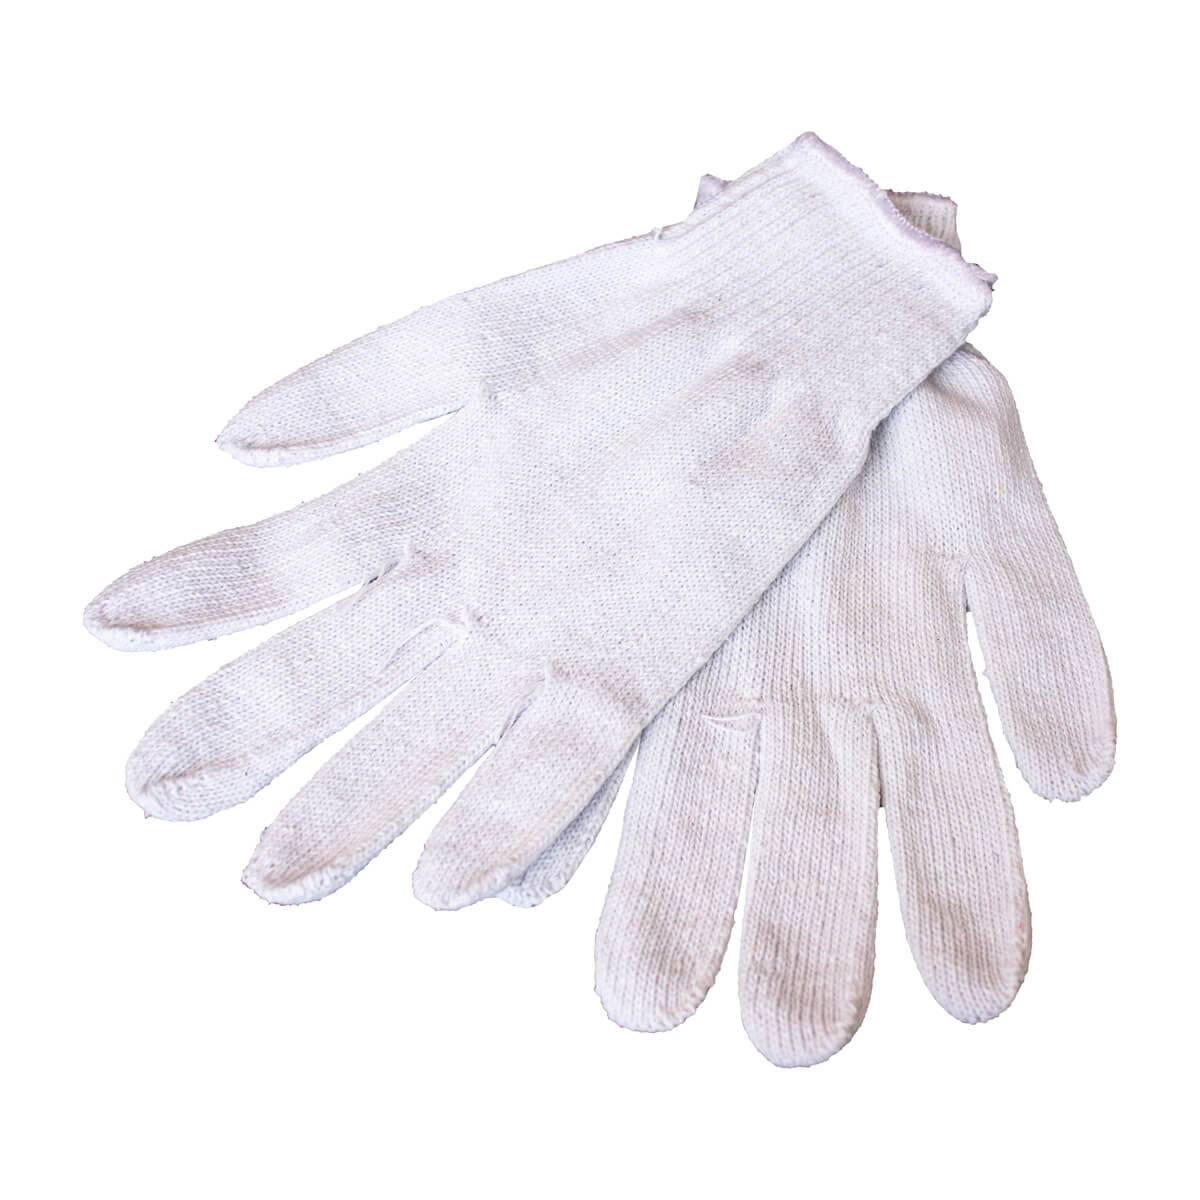 Gloves Poly/Cotton Knited Large MaxiSafe